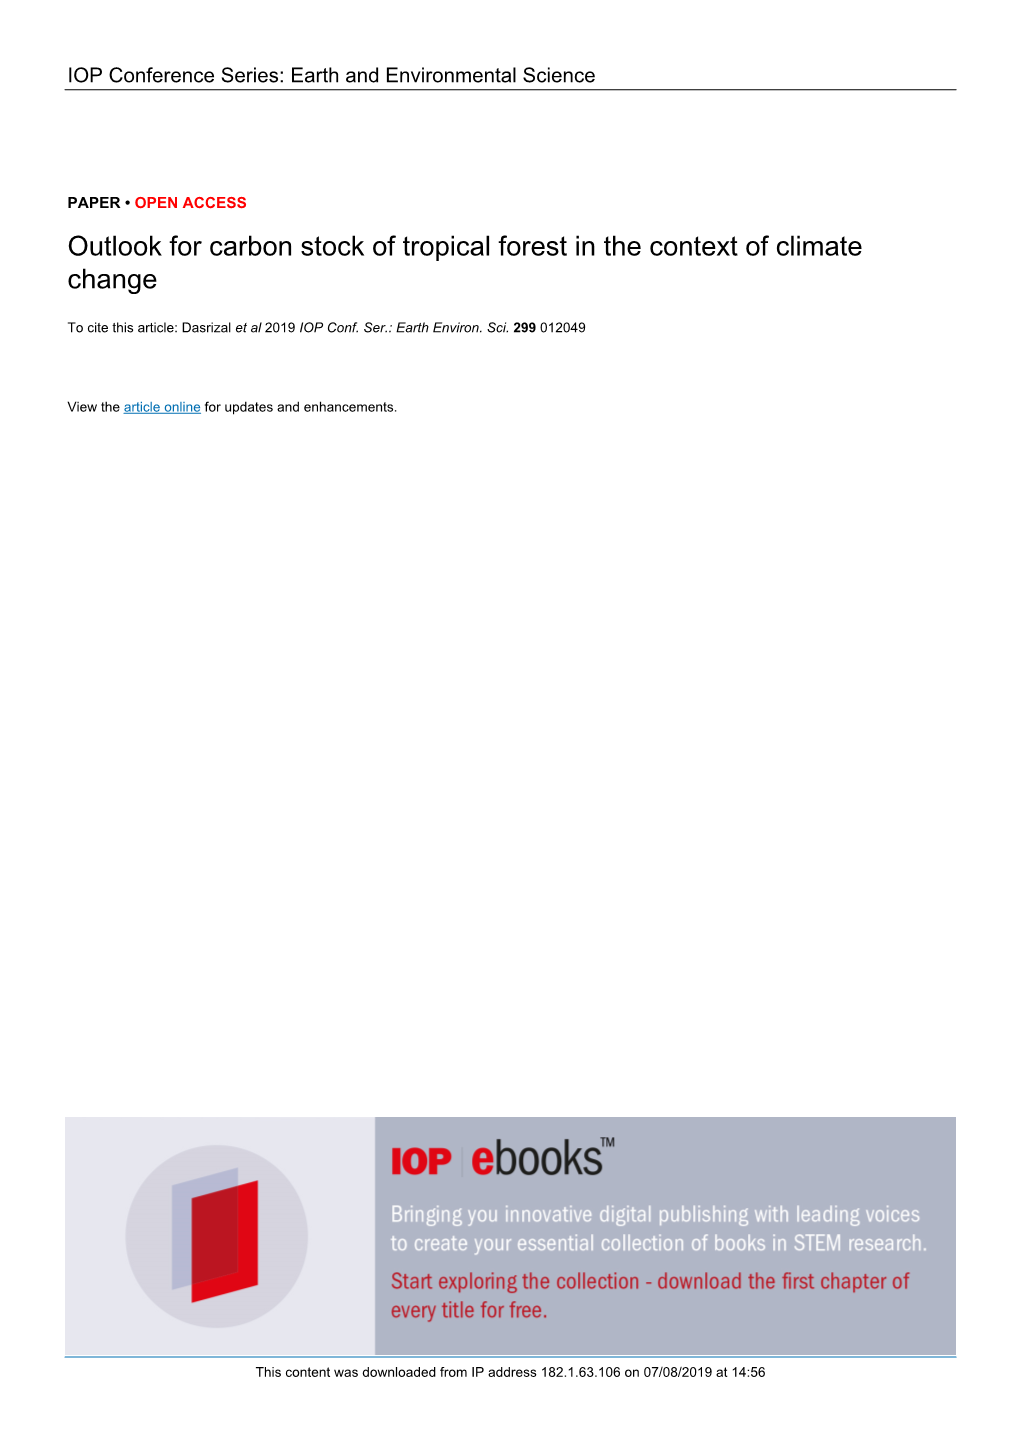 Outlook for Carbon Stock of Tropical Forest in the Context of Climate Change